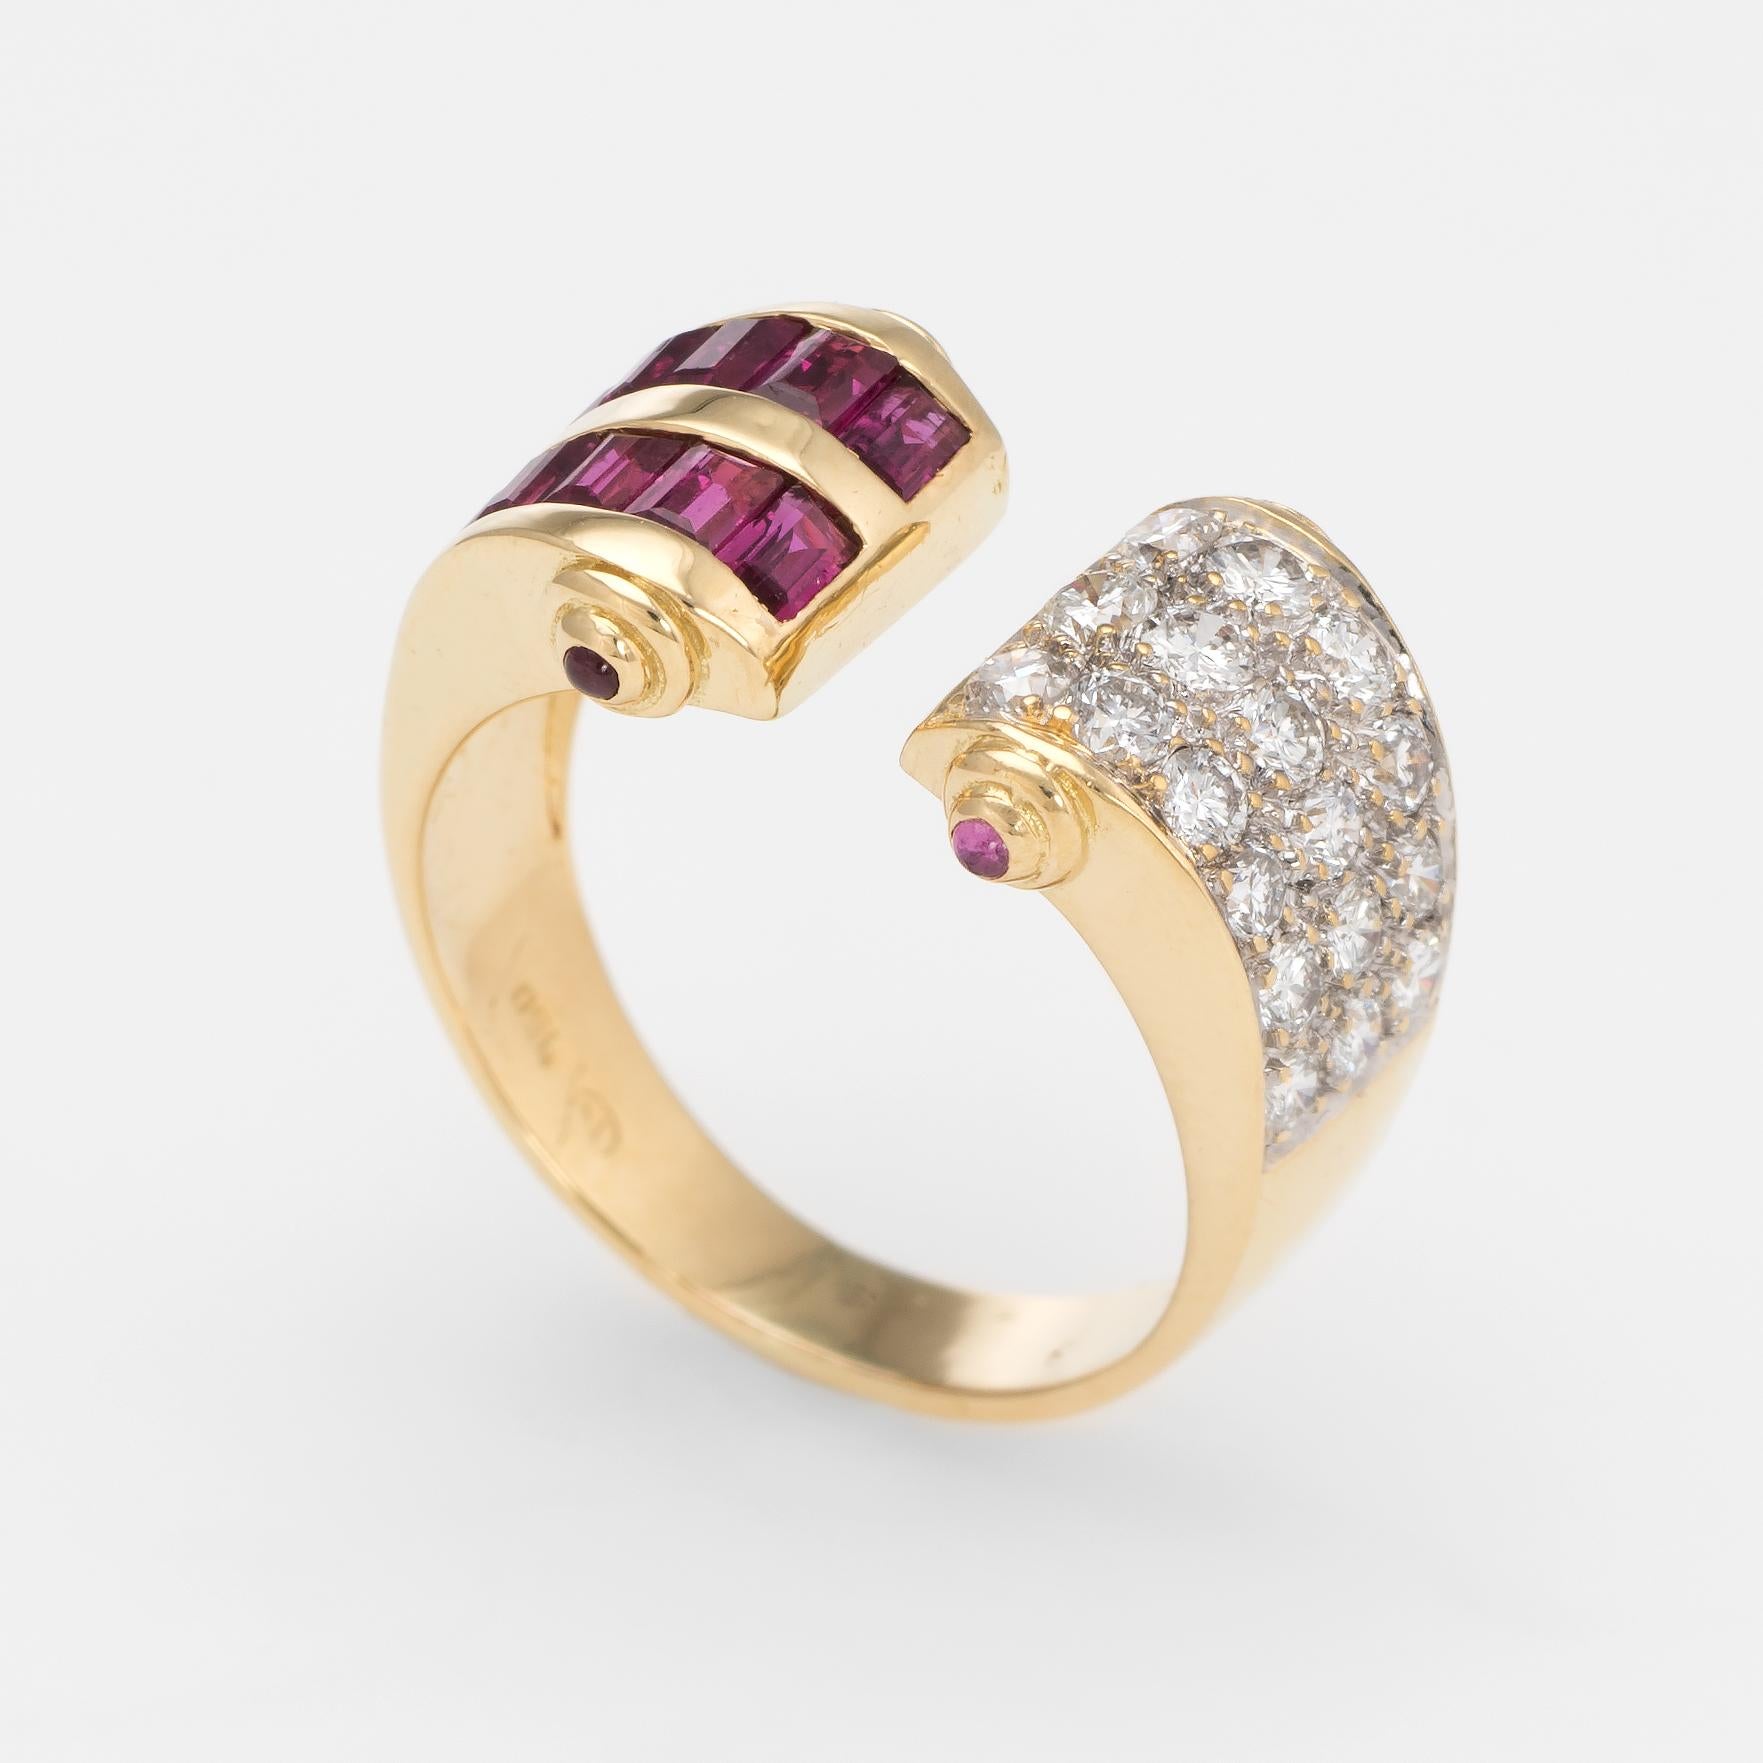 Elegant vintage cuff ring (circa 1980s), crafted in 18 karat yellow gold. 

Round brilliant cut diamonds are pave set into the mount and total an estimated 0.50 carats (estimated at G-H color and VS2 clarity). The straight baguette cut rubies